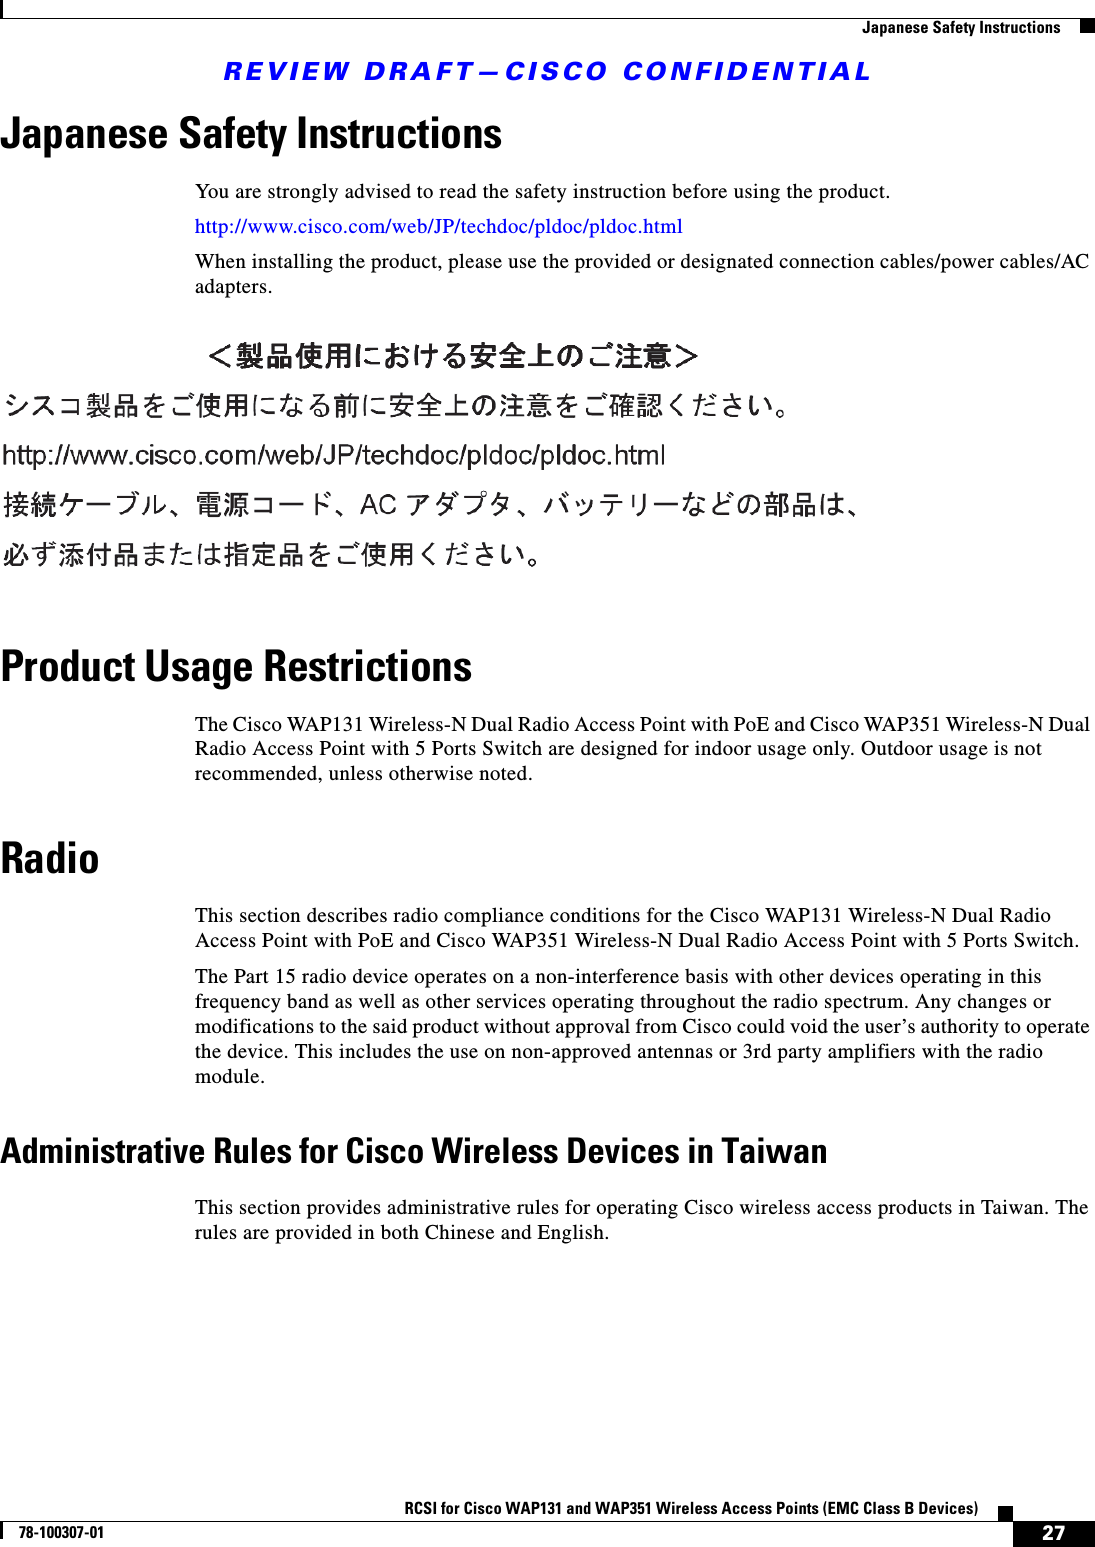 REVIEW DRAFT—CISCO CONFIDENTIAL27RCSI for Cisco WAP131 and WAP351 Wireless Access Points (EMC Class B Devices)78-100307-01  Japanese Safety InstructionsJapanese Safety InstructionsYou are strongly advised to read the safety instruction before using the product. http://www.cisco.com/web/JP/techdoc/pldoc/pldoc.htmlWhen installing the product, please use the provided or designated connection cables/power cables/AC adapters.Product Usage RestrictionsThe Cisco WAP131 Wireless-N Dual Radio Access Point with PoE and Cisco WAP351 Wireless-N Dual Radio Access Point with 5 Ports Switch are designed for indoor usage only. Outdoor usage is not recommended, unless otherwise noted.RadioThis section describes radio compliance conditions for the Cisco WAP131 Wireless-N Dual Radio Access Point with PoE and Cisco WAP351 Wireless-N Dual Radio Access Point with 5 Ports Switch.The Part 15 radio device operates on a non-interference basis with other devices operating in this frequency band as well as other services operating throughout the radio spectrum. Any changes or modifications to the said product without approval from Cisco could void the user’s authority to operate the device. This includes the use on non-approved antennas or 3rd party amplifiers with the radio module.Administrative Rules for Cisco Wireless Devices in TaiwanThis section provides administrative rules for operating Cisco wireless access products in Taiwan. The rules are provided in both Chinese and English.